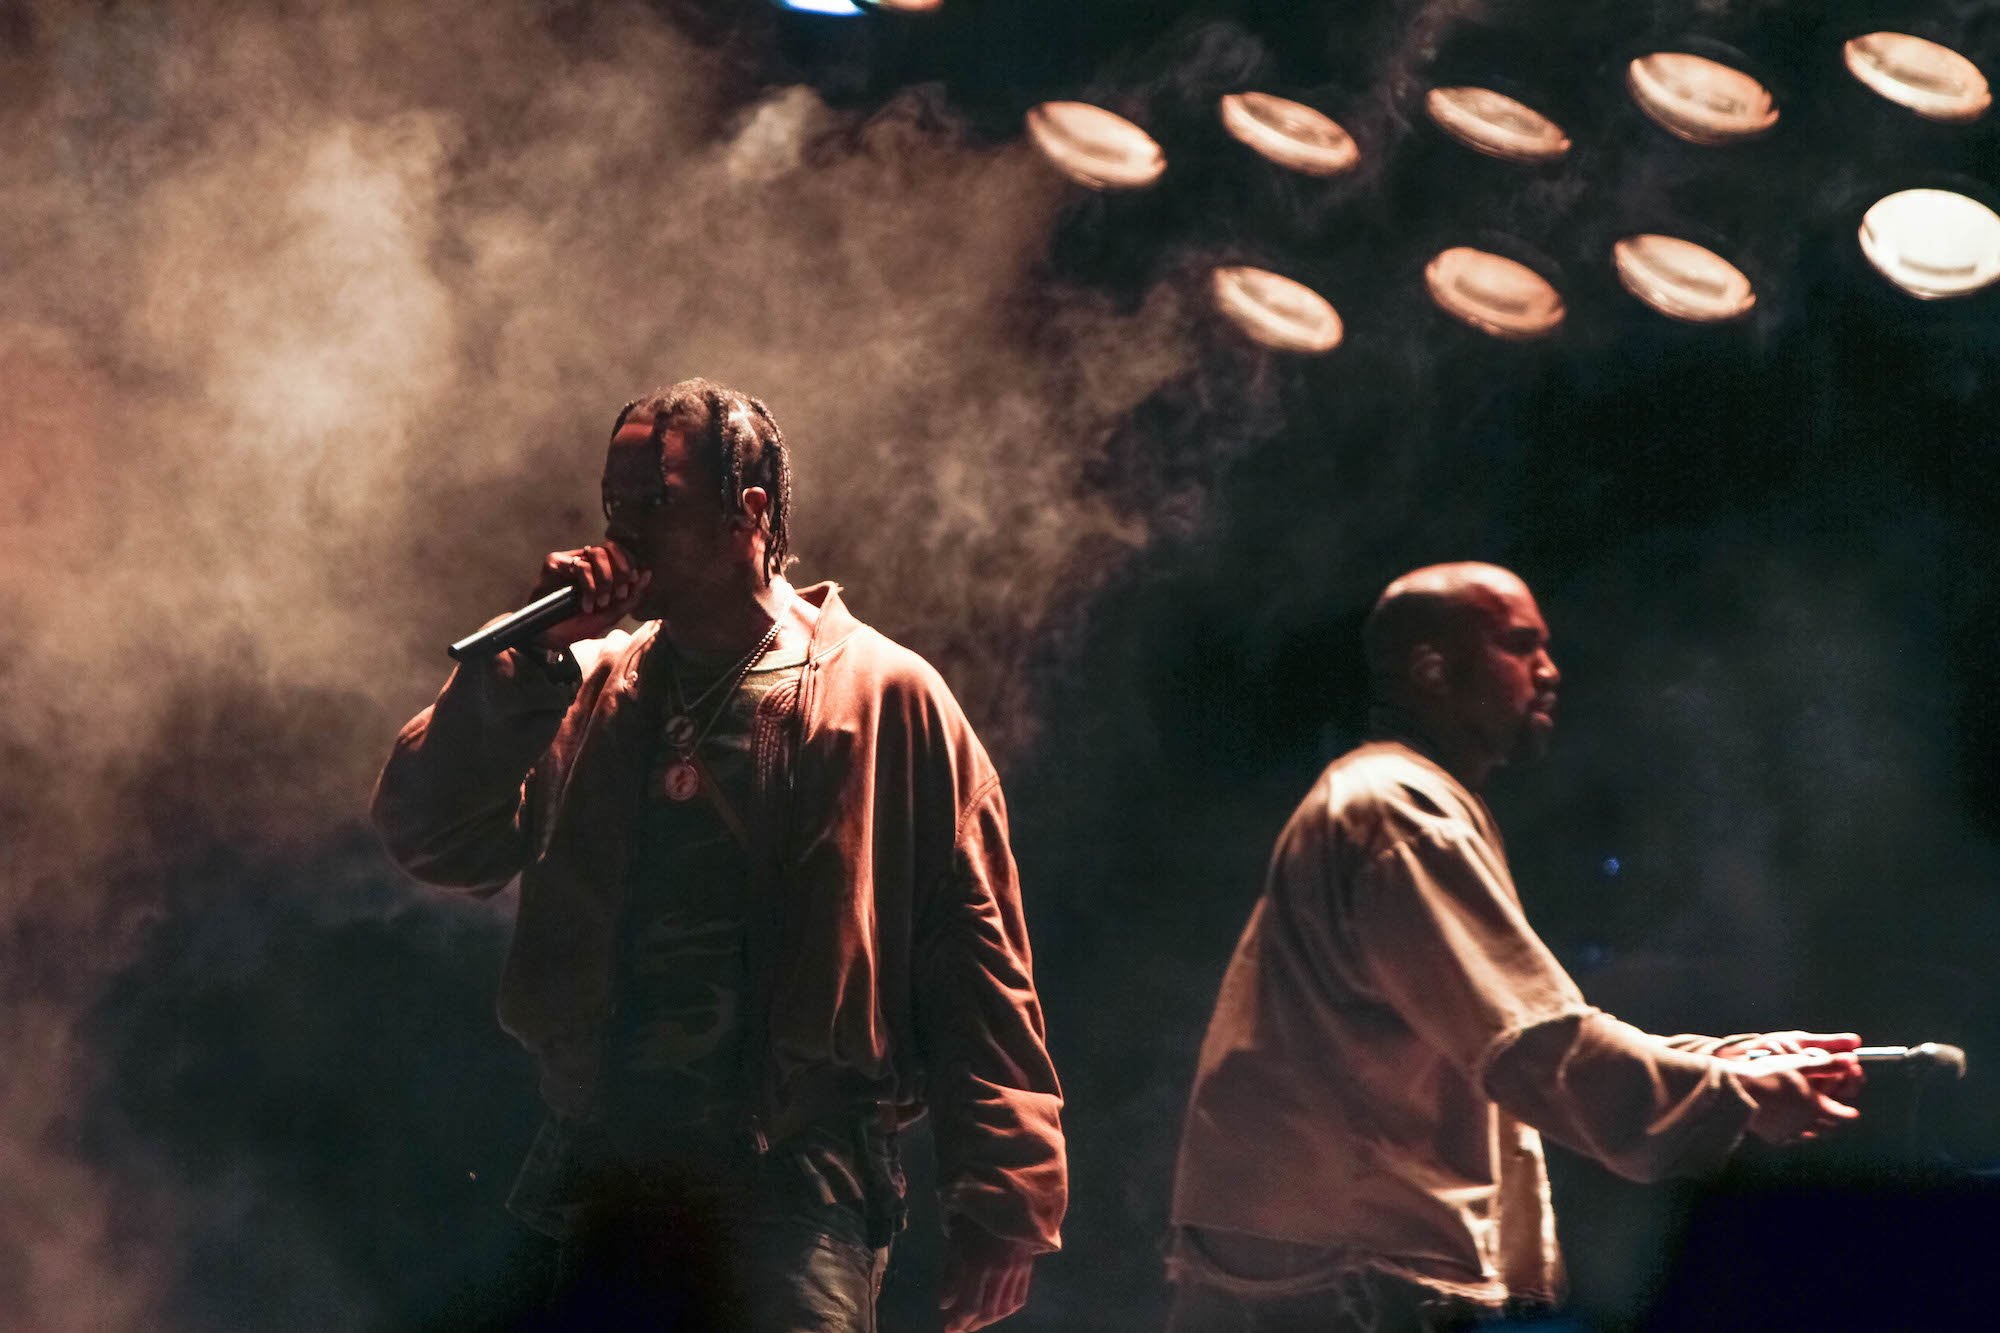 Travis Scott and Kanye West performing on stage